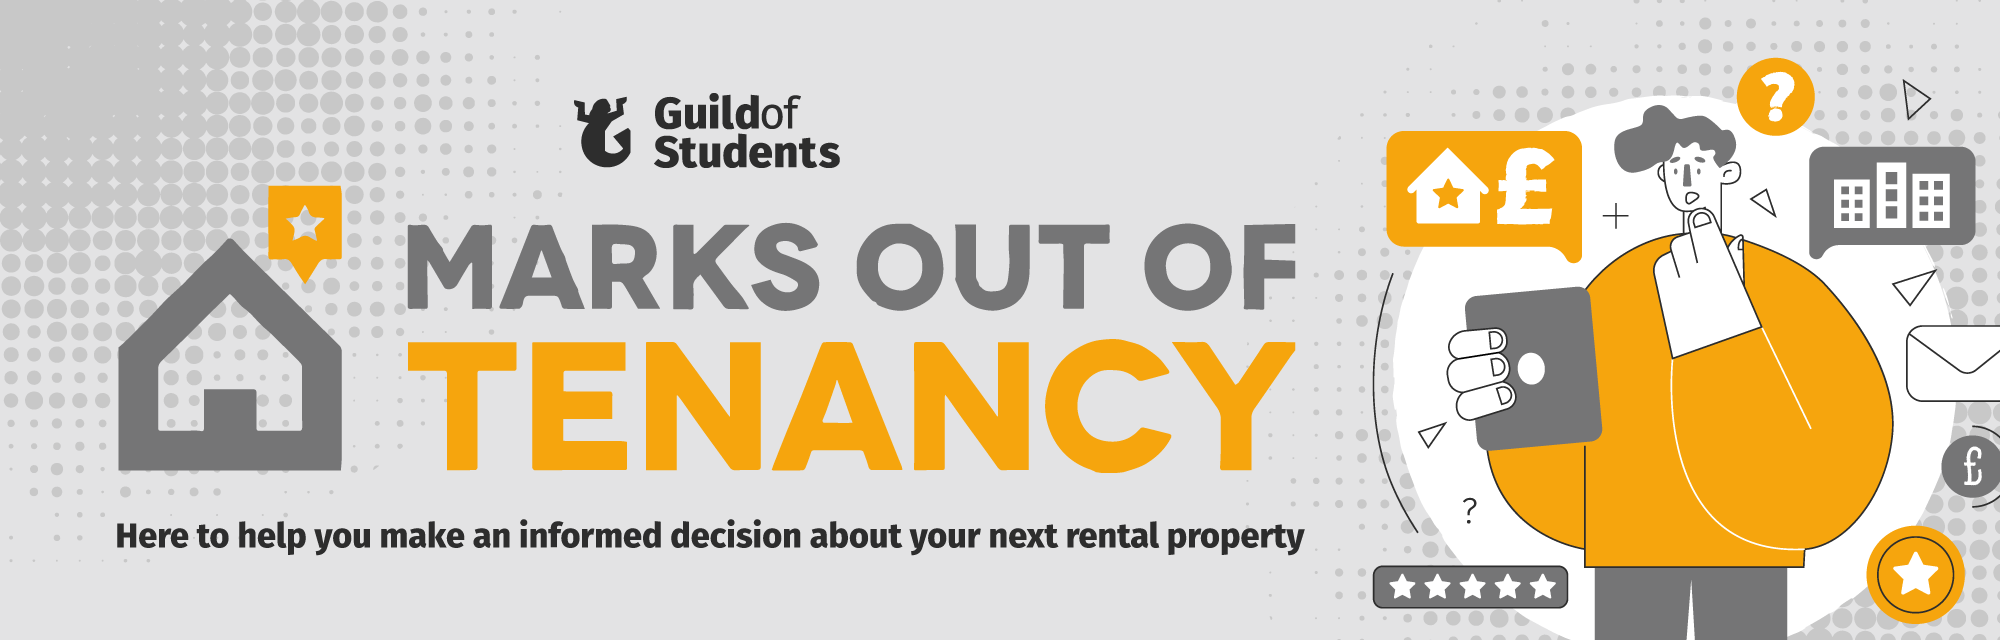 Marks OutnOf Tenancy Graphic